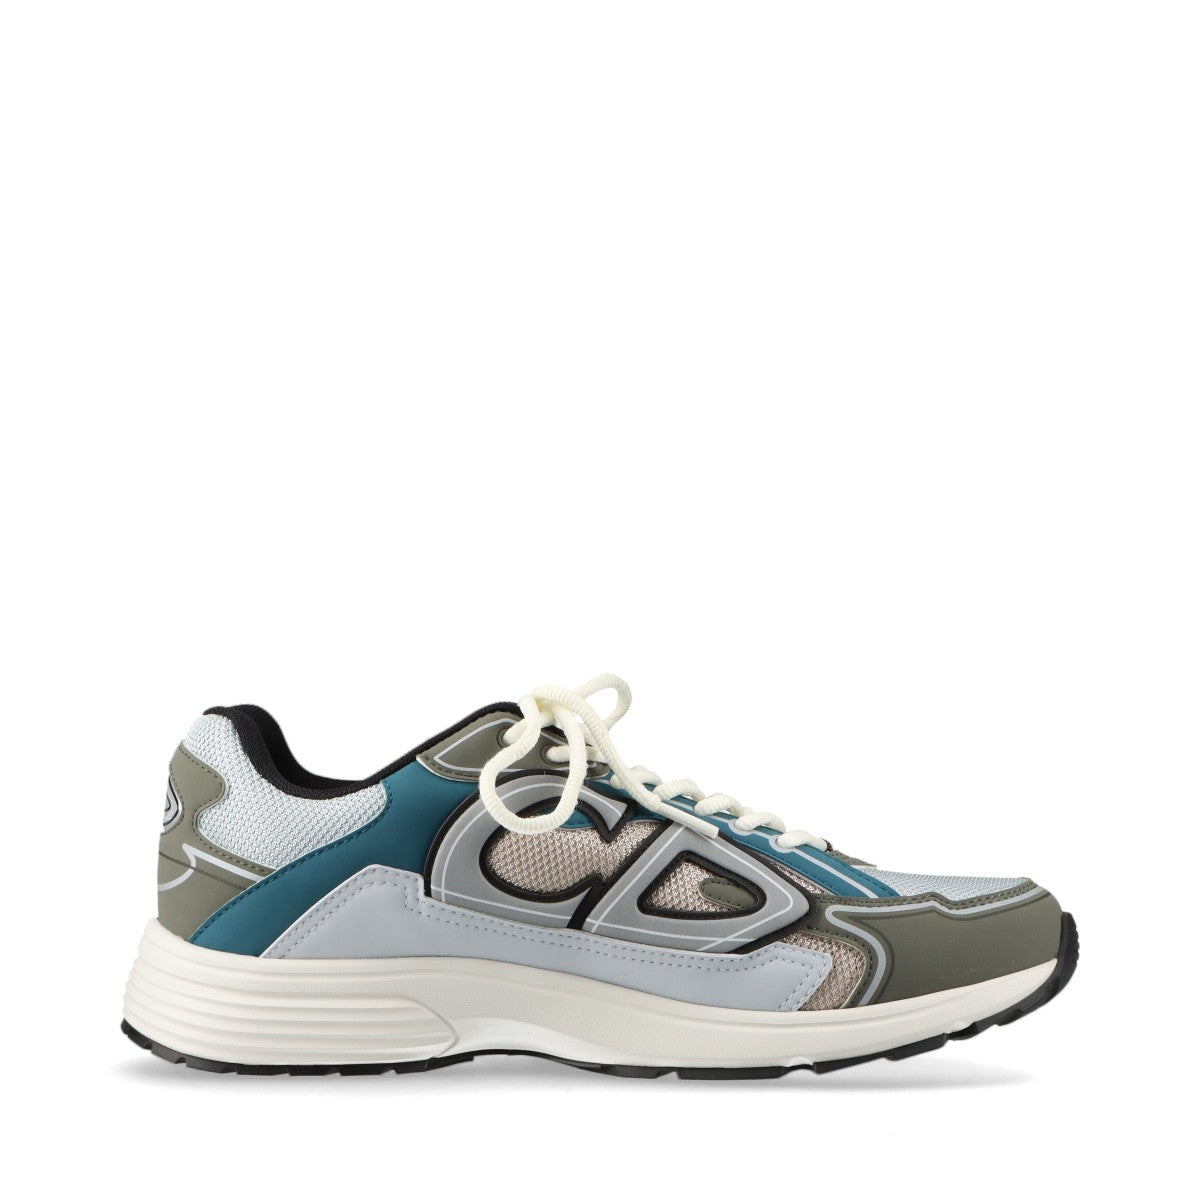 Dior B30 Mesh x leather Sneakers 42 Men's Blue x gray DC1121 Replaceable cord Box There is a storage bag